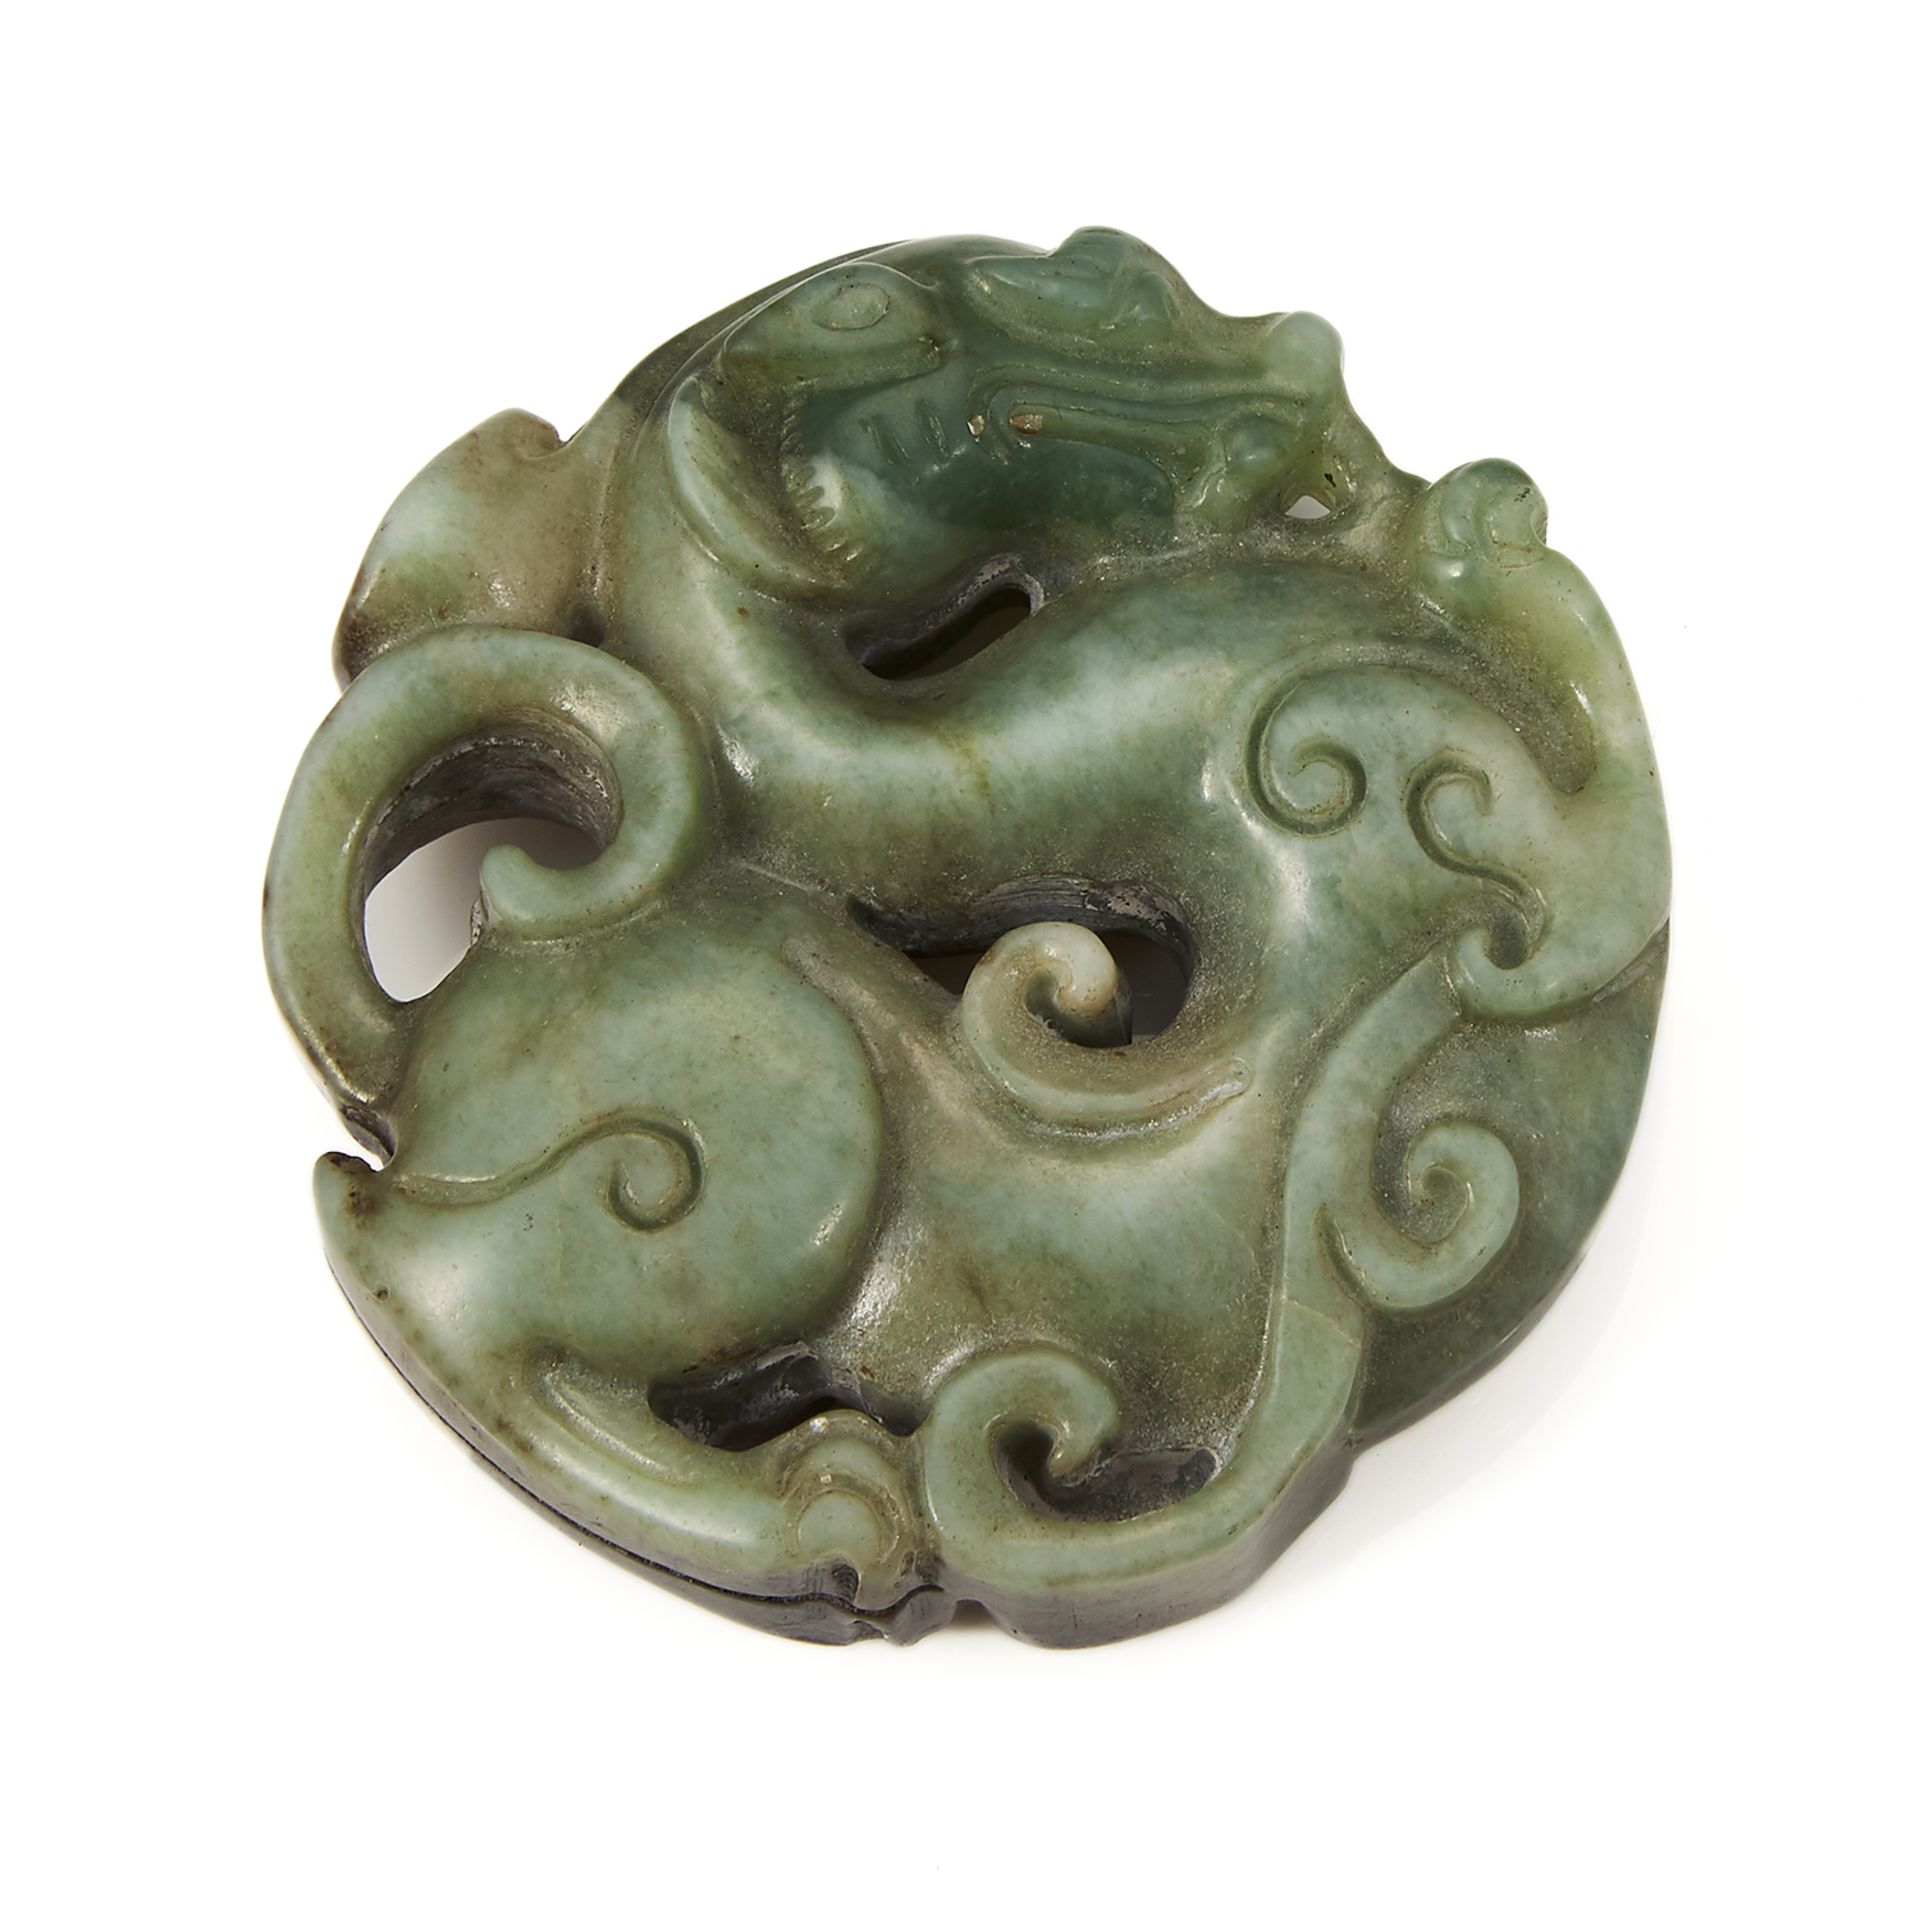 A CHINESE JADE DRAGON PLAQUE of circular form, carved depicting a dragon coiled around itself with